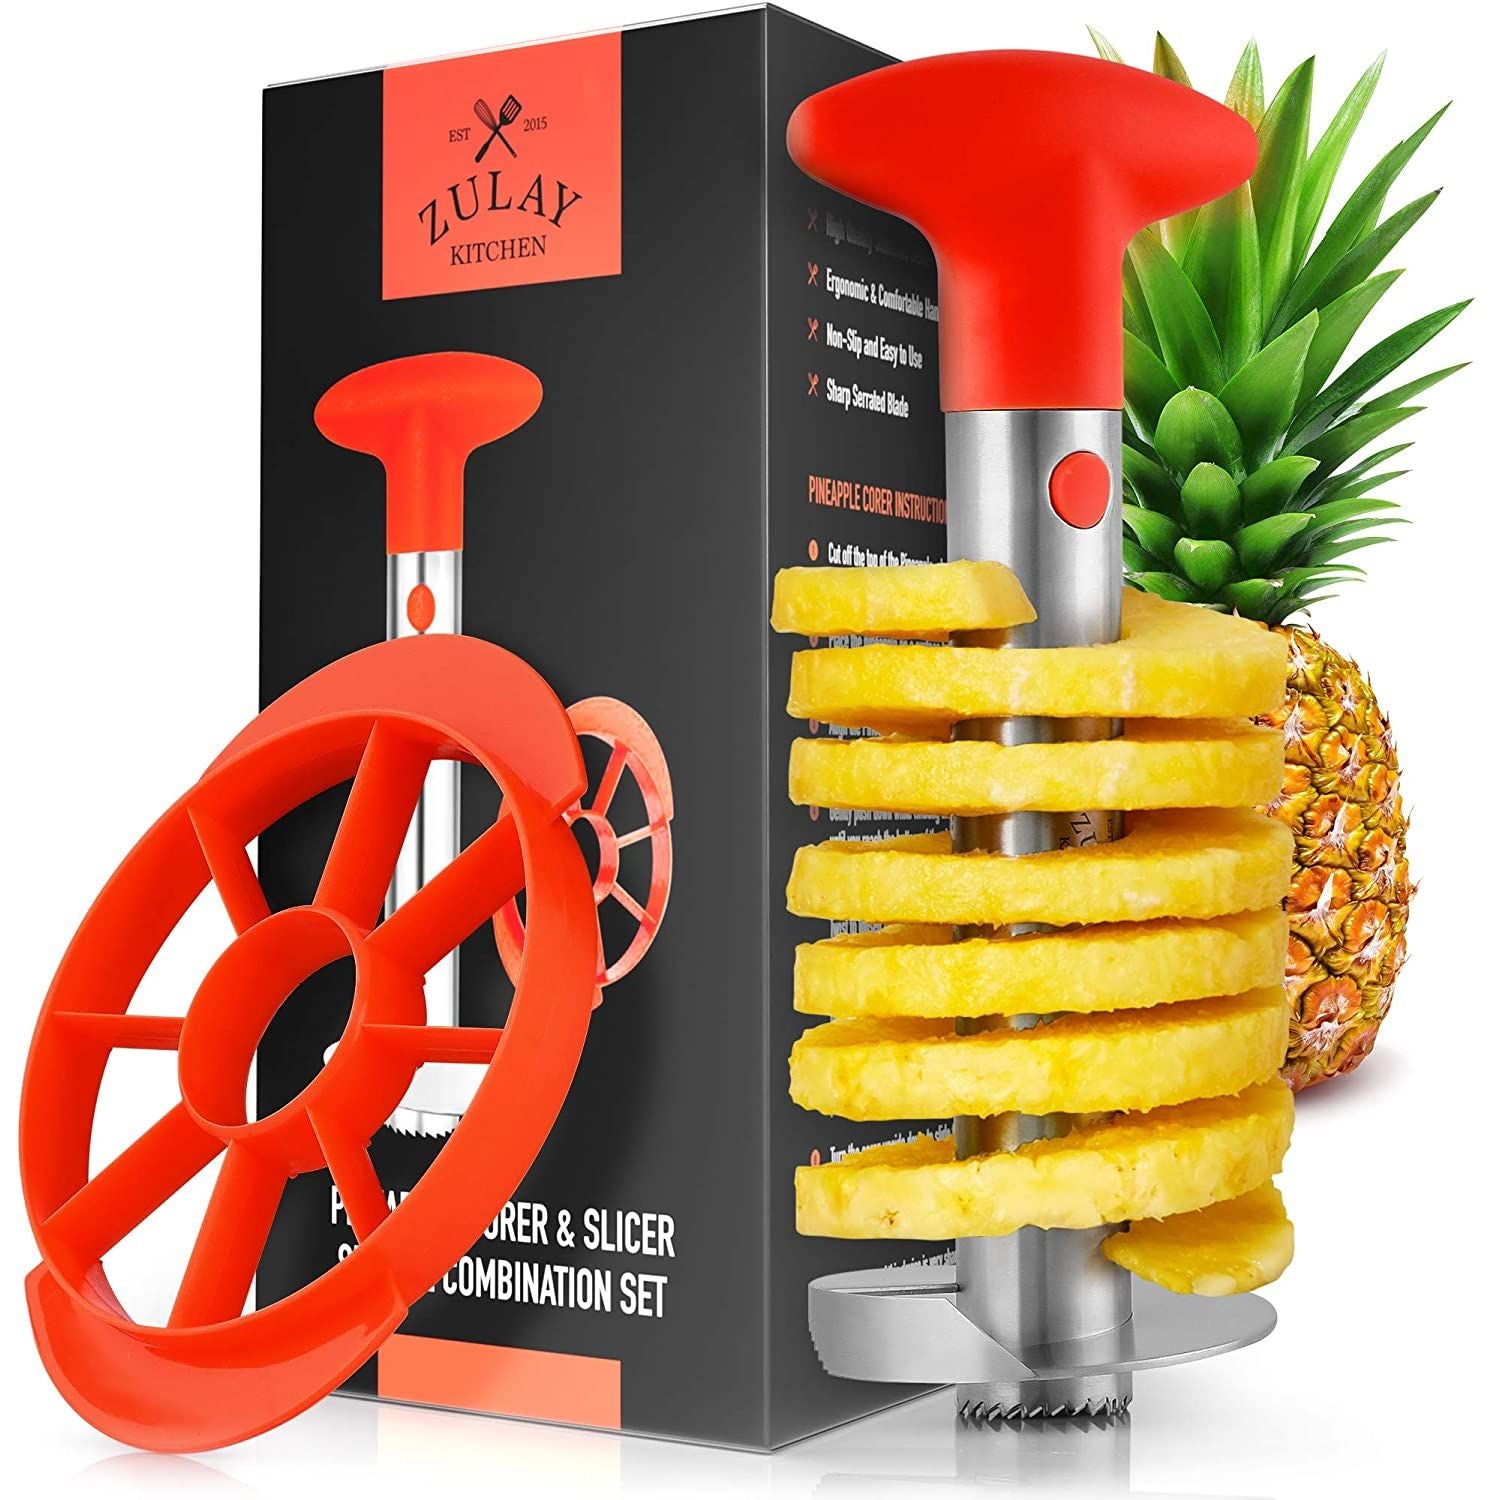 Zulay Kitchen Pineapple Corer and Slicer Tool Set - Yellow, 1